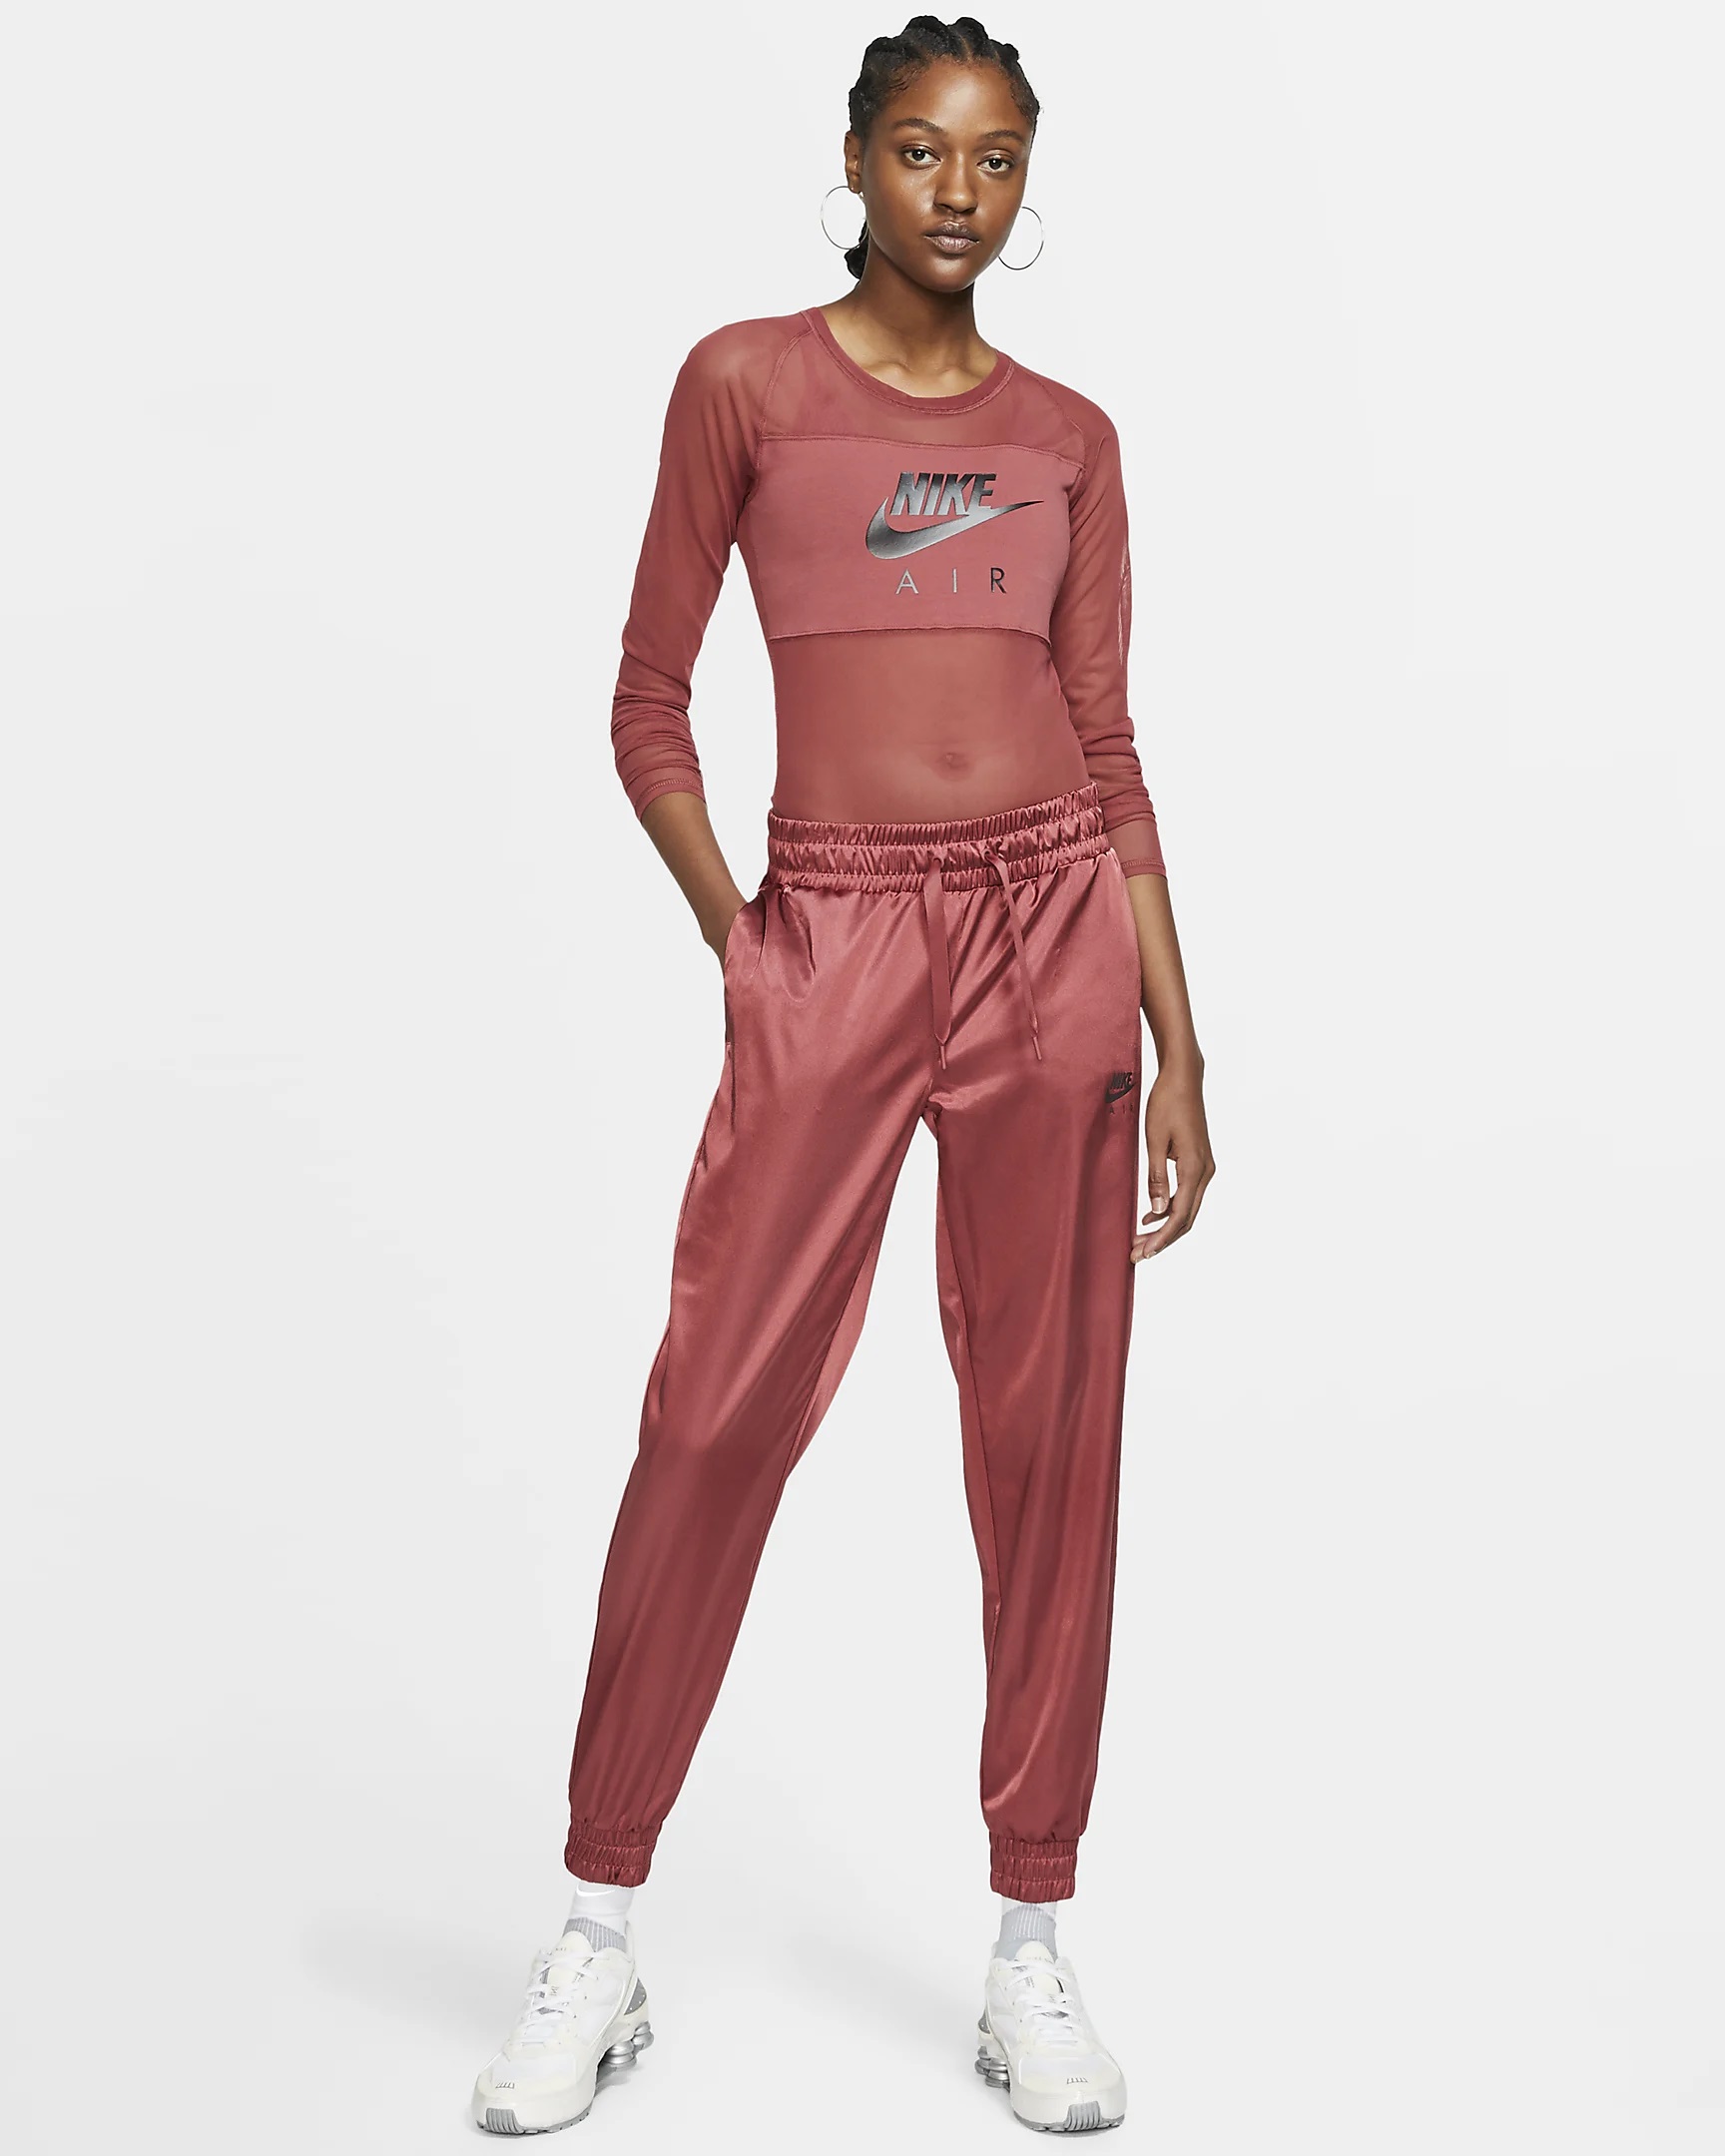 Strike A Smooth Pose In Nike's Air Satin Track Pants | SNOBETTE